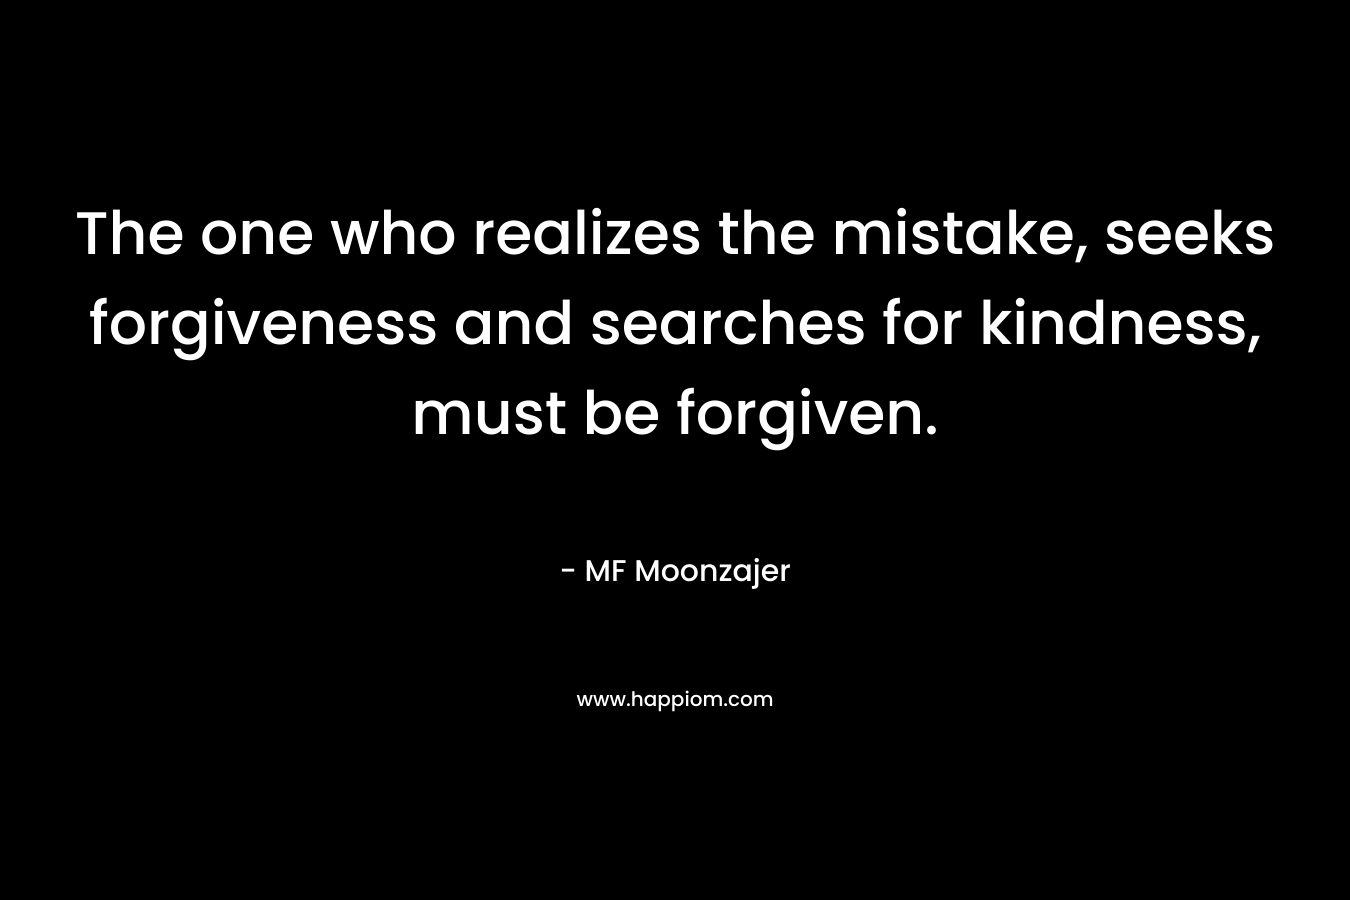 The one who realizes the mistake, seeks forgiveness and searches for kindness, must be forgiven.